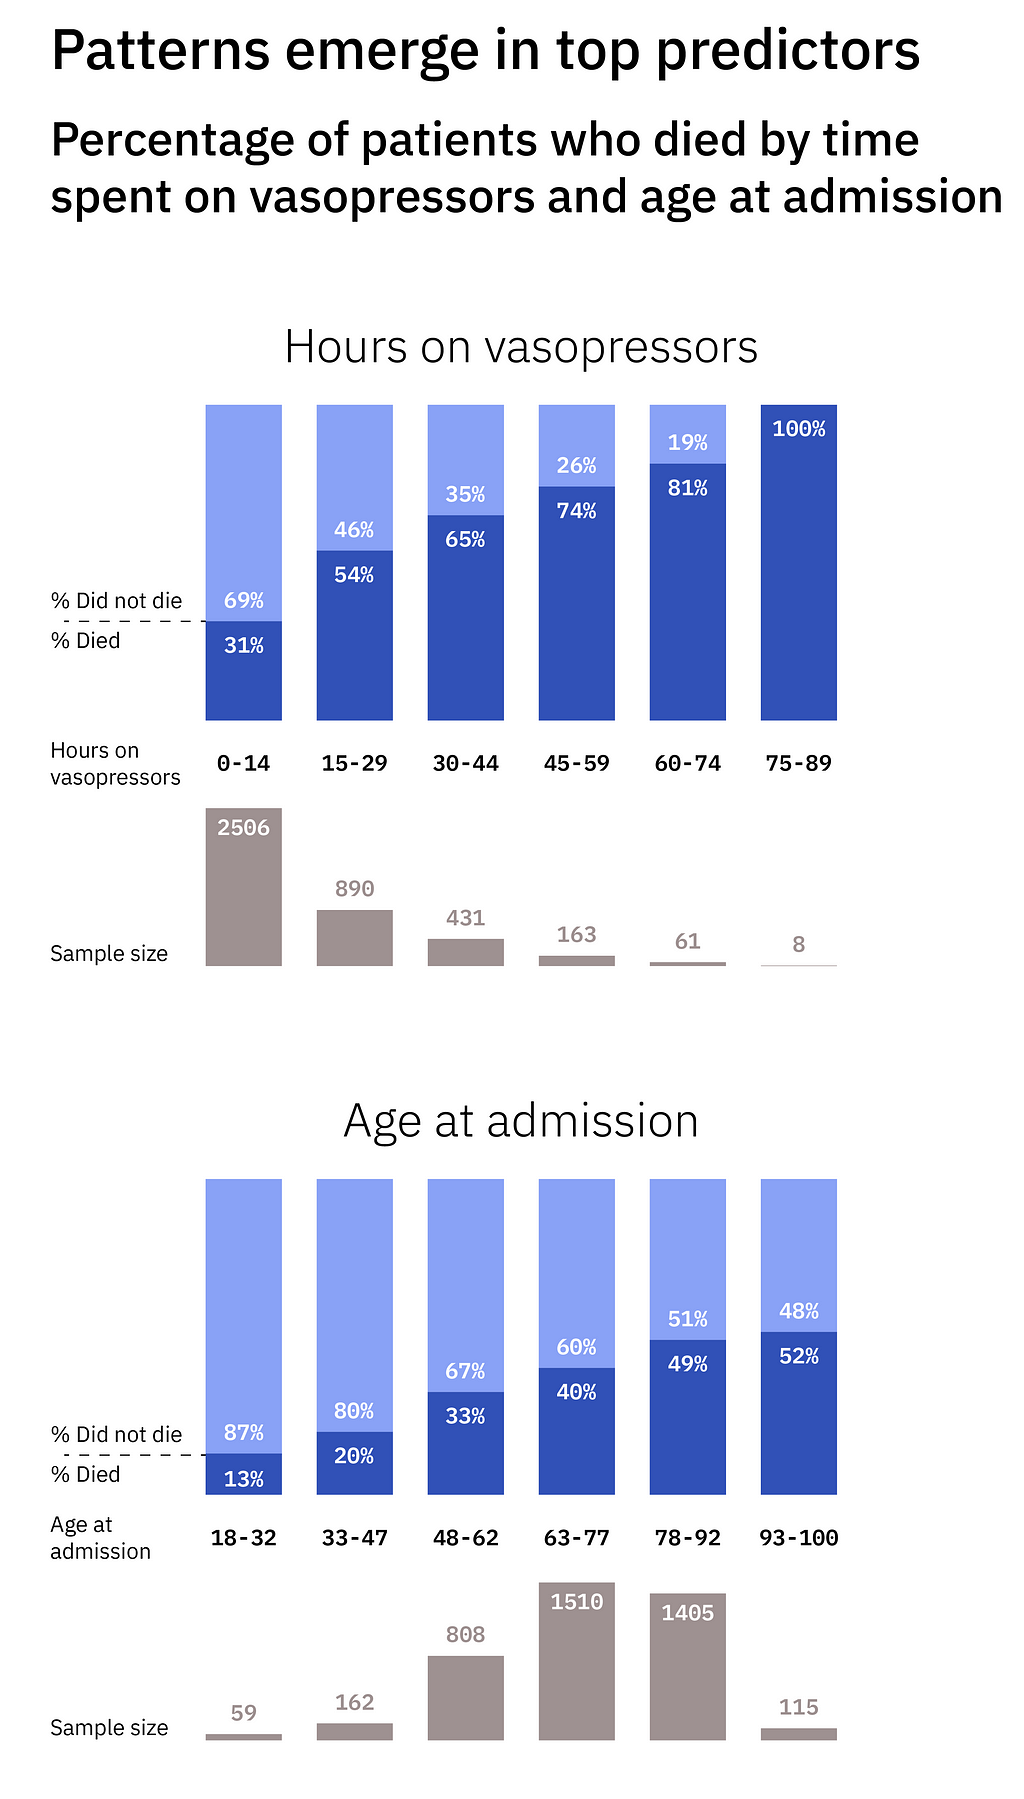 Image showing patients deaths related to some of the most important features, such as hours on vasopressors and age at admission